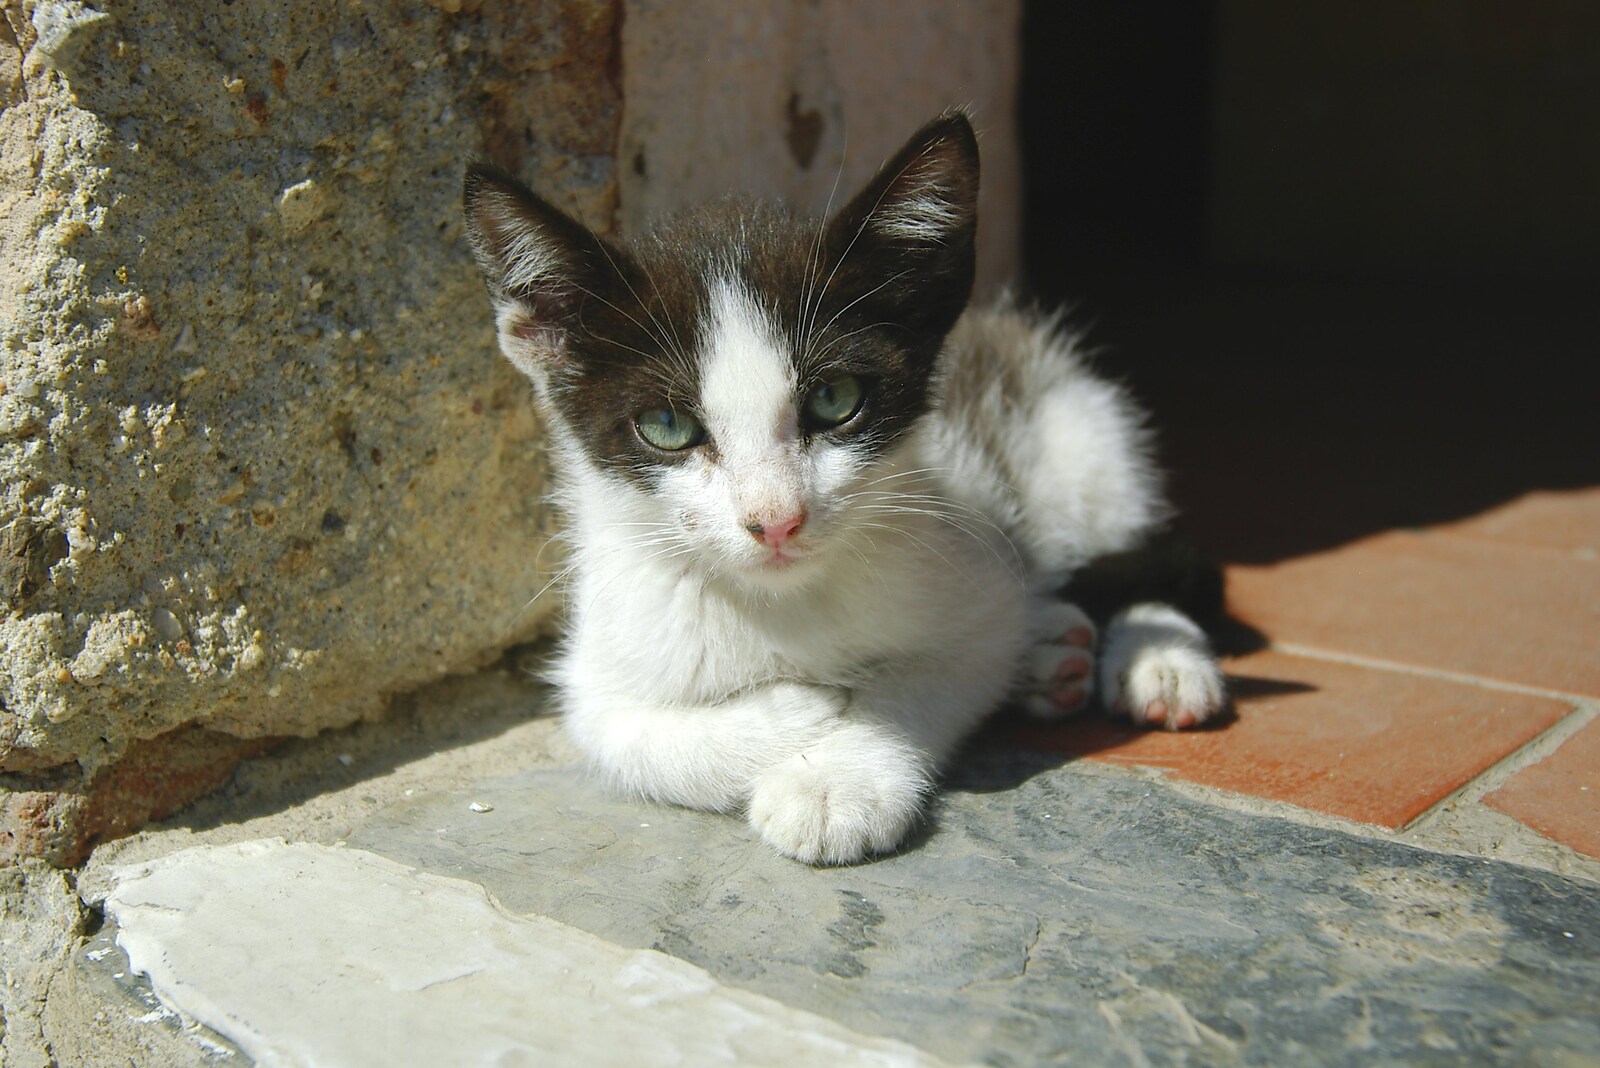 A feral kitten loiters by the tourist office from Salvador Dalí's House, Port Lligat, Spain - 19th Deptember 2006